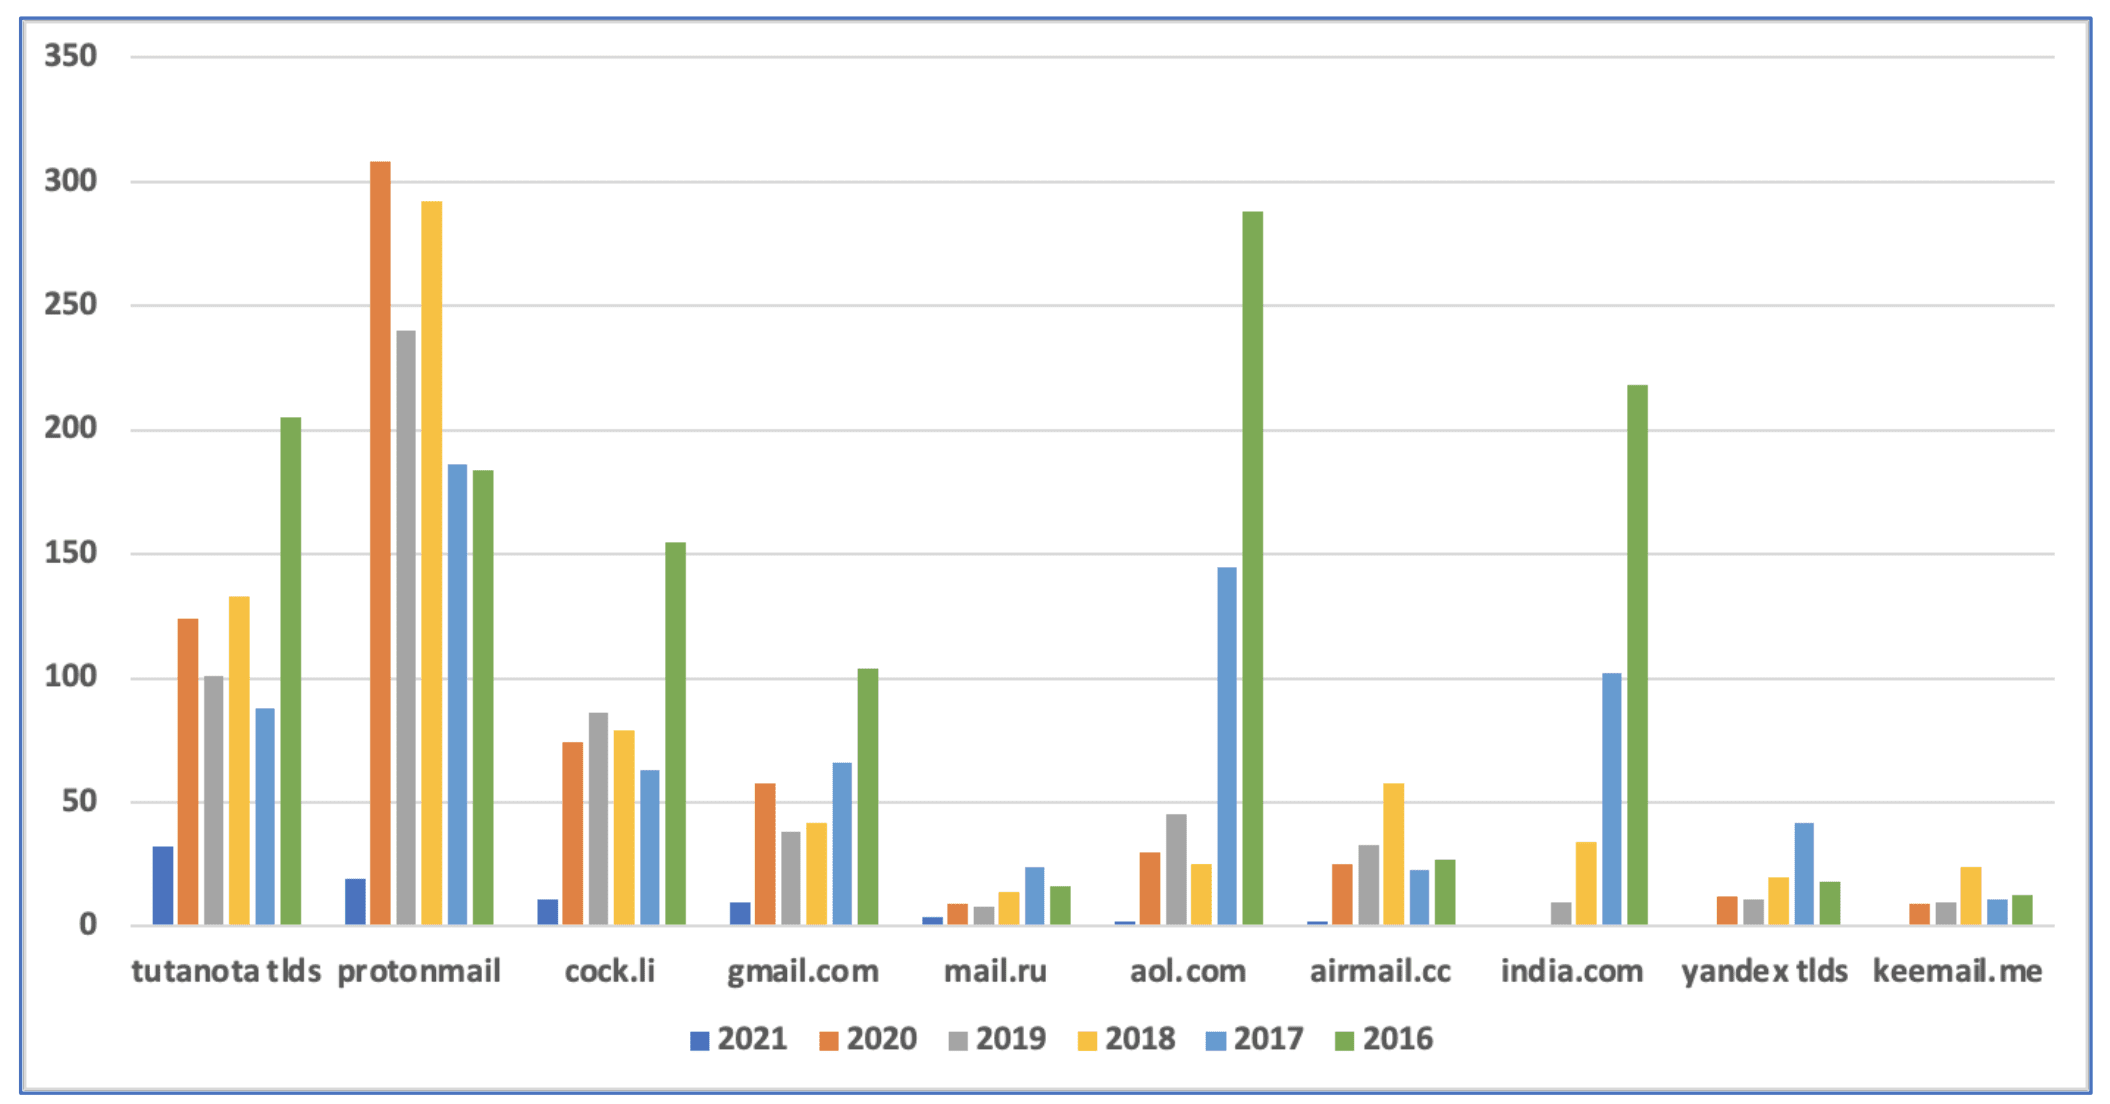 Distribution of E-mail Domain Preferences by Ransomware Group by Calendar Year